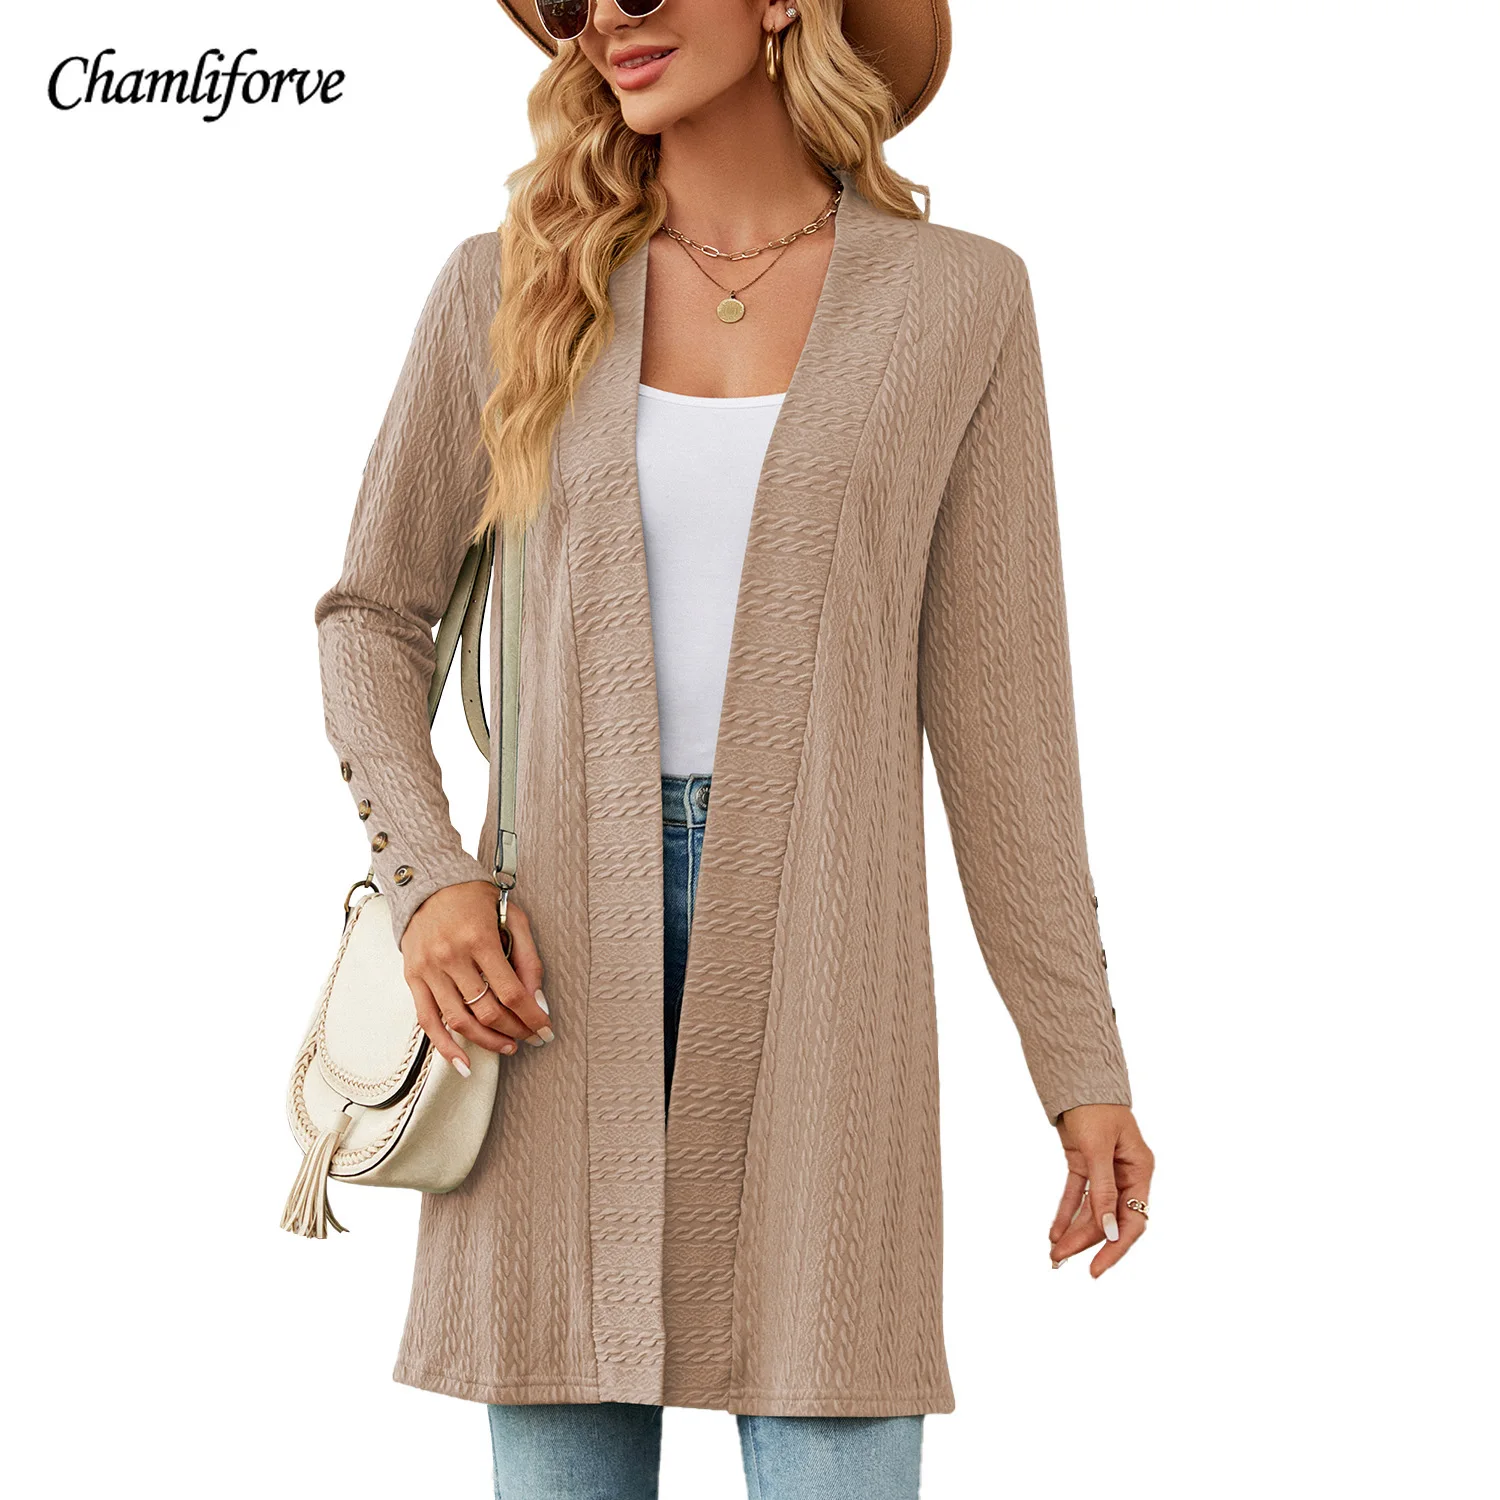 chamliforve 2023 autumn and winter new solid color button long sleeve loose cardigan coat for women coat women winter jacket autumn winter fleece jacket women casual plush coat jackets long sleeve pocket knit shirt loose jacket for women button 2023